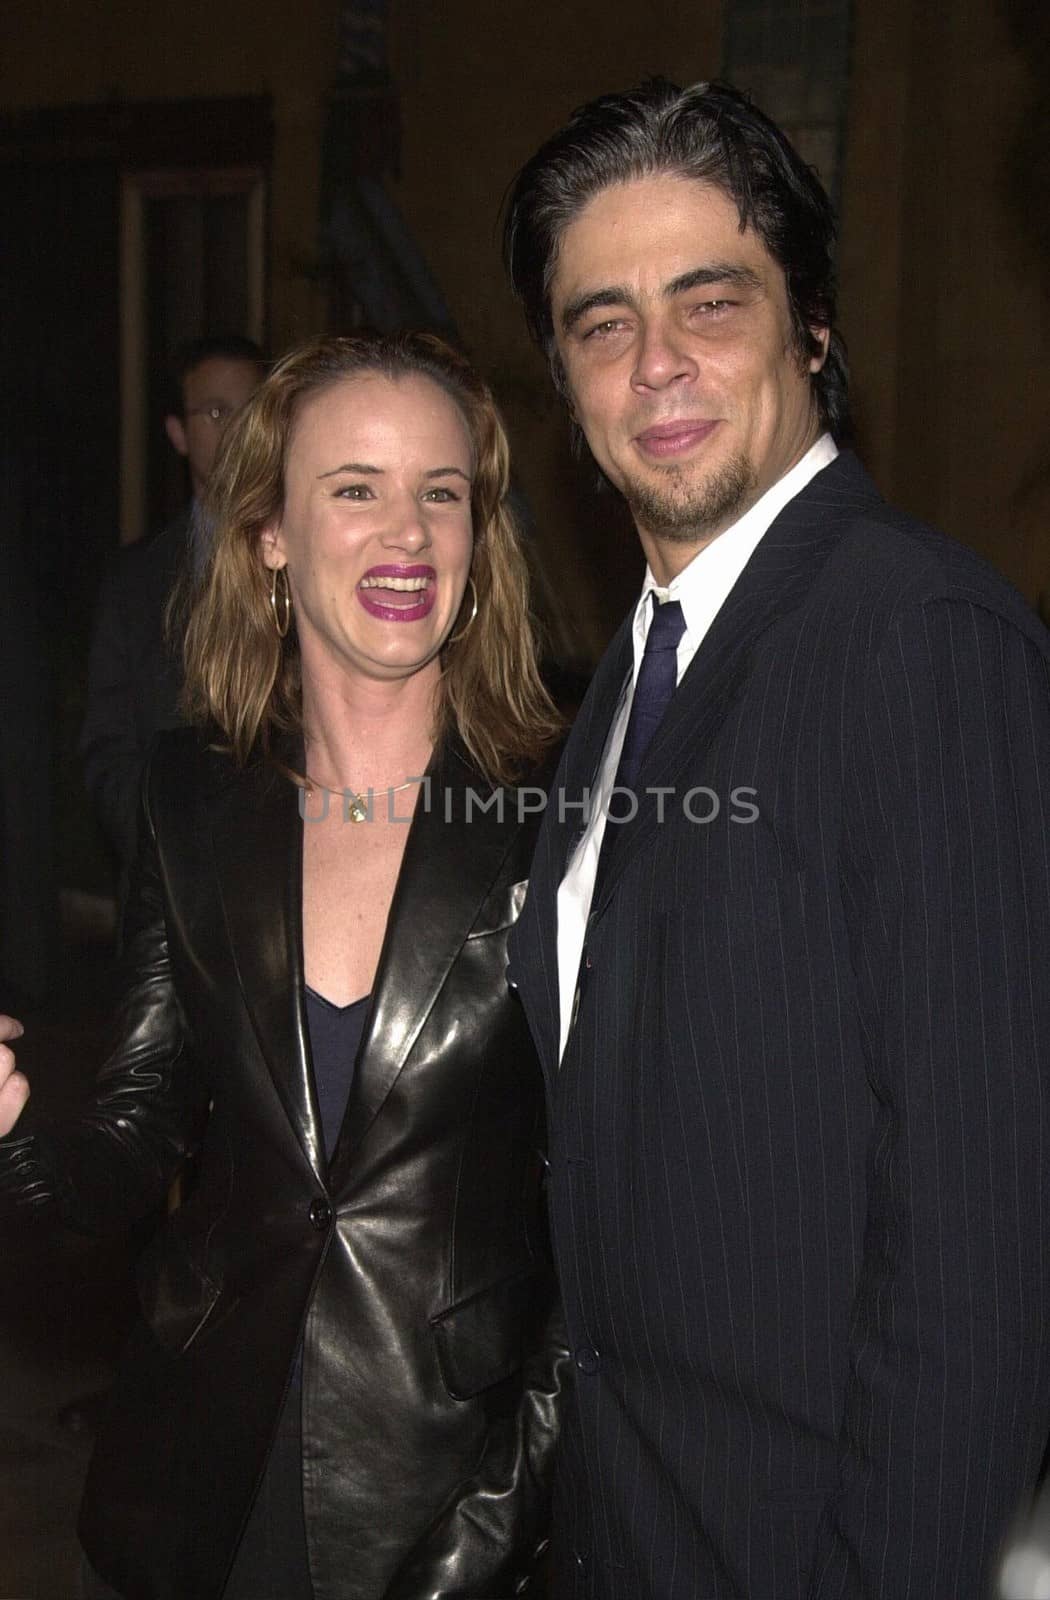 Juliette Lewis and Benecio Del Torro at the premiere of The Way Of The Gun in Hollywood. 08-29-00